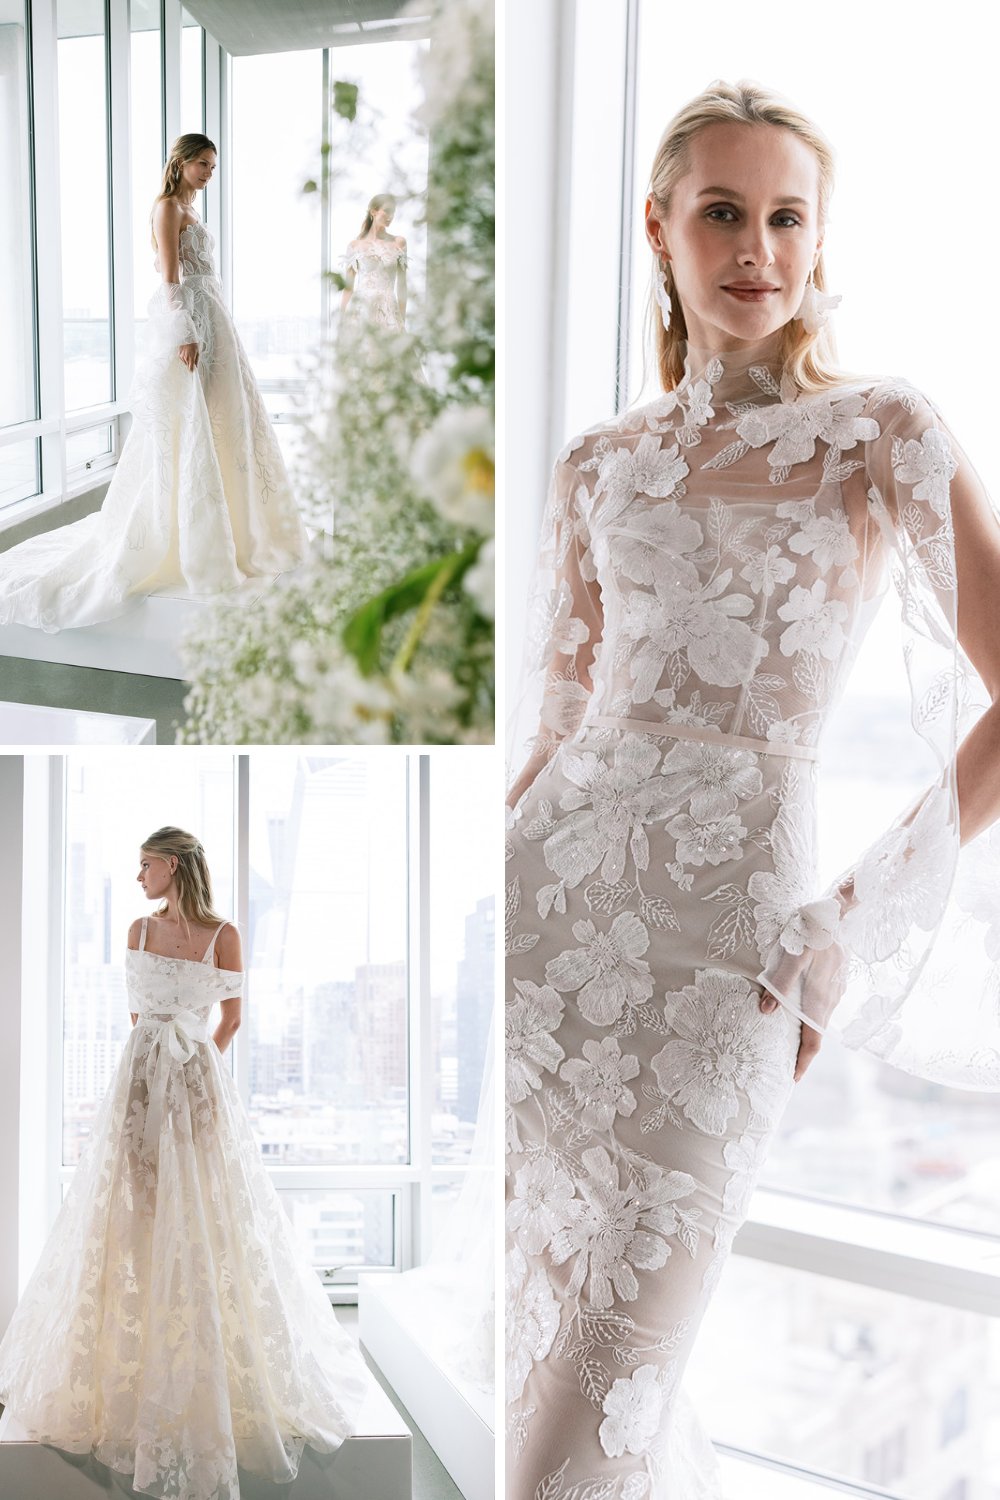 Collage of images of sheer style wedding gowns